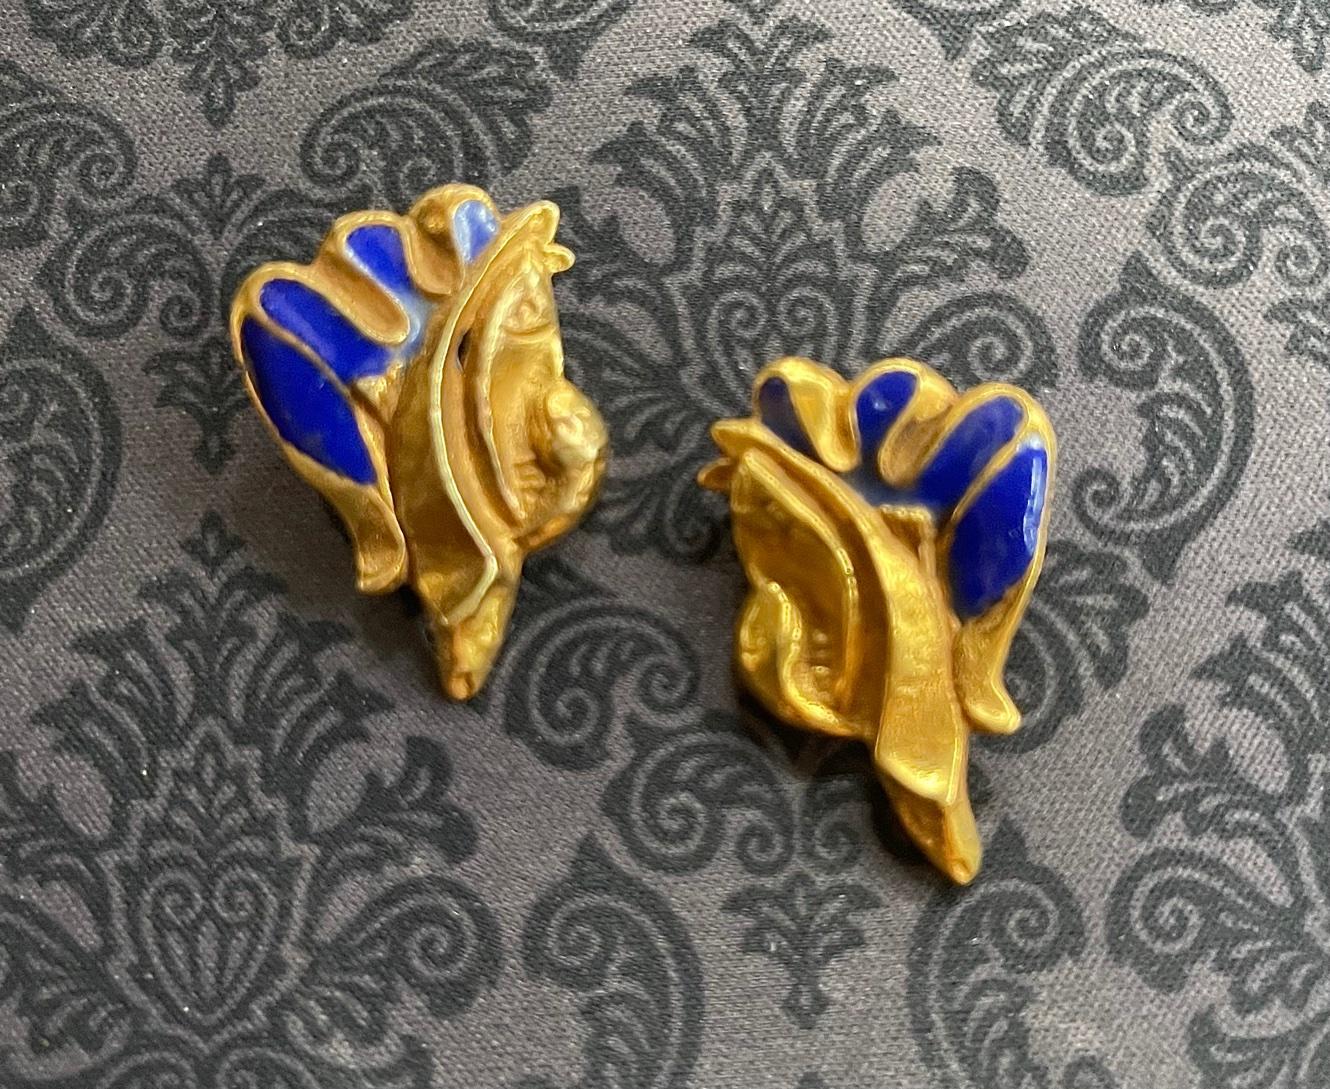 A pair of bespoken earrings by French Art Jeweler Line Vautrin (1913-1997). The cast bronze earring features a sculptural design that evokes an archaic form with shell like scroll and wing-like spread decorated with a cobalt blue enamel surface.